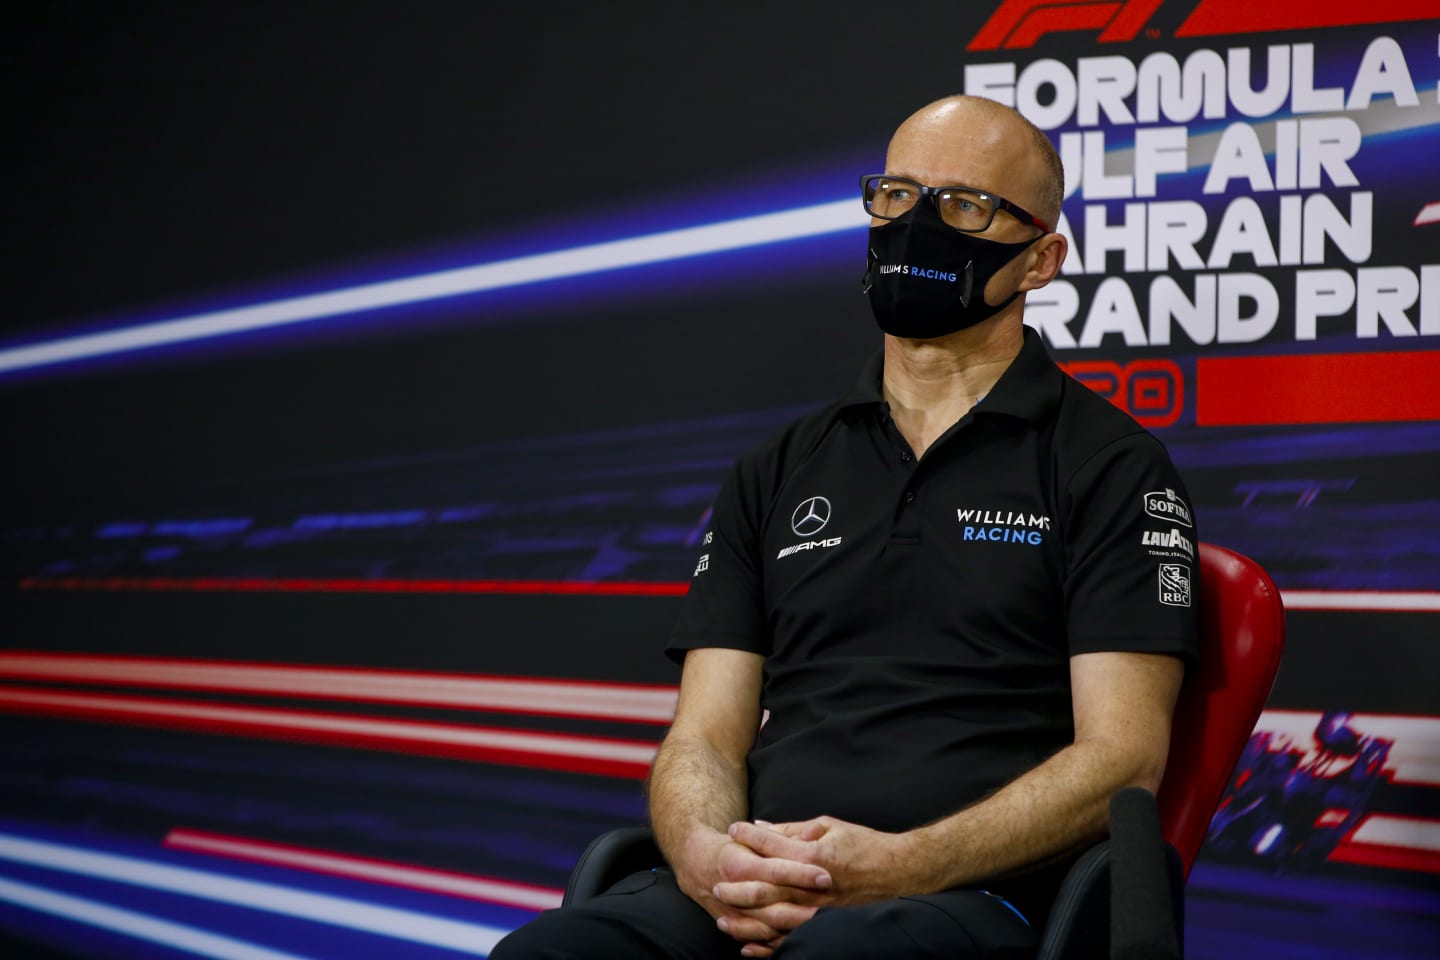 BAHRAIN, BAHRAIN - NOVEMBER 27: Williams Acting Team Principal Simon Roberts talks in the Team Principals Press Conference during practice ahead of the F1 Grand Prix of Bahrain at Bahrain International Circuit on November 27, 2020 in Bahrain, Bahrain. (Photo by Andy Hone - Pool/Getty Images)